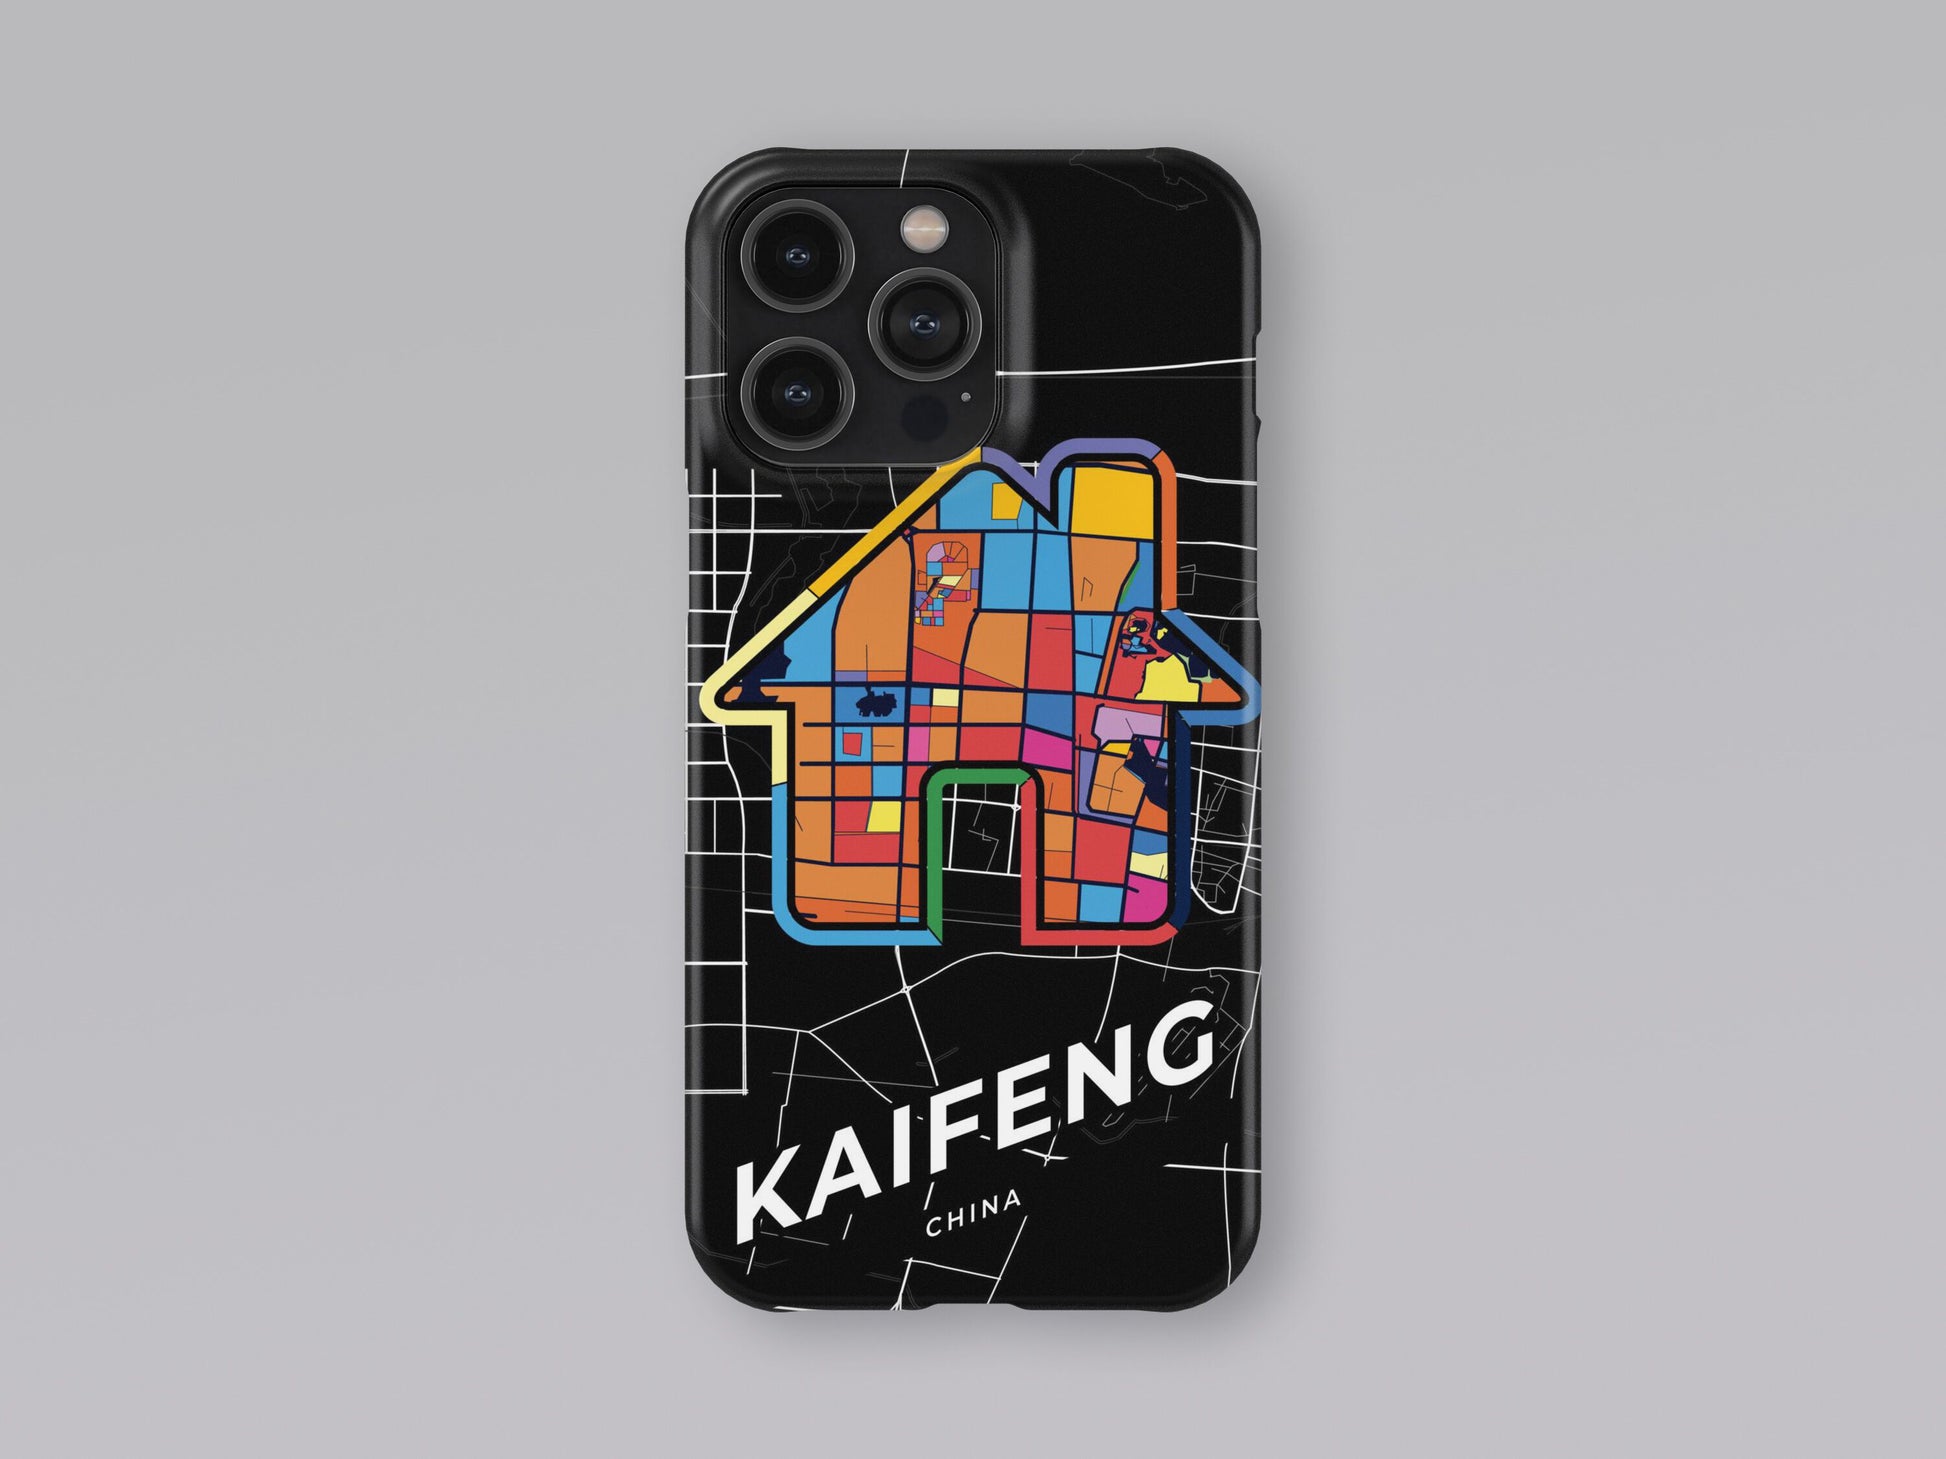 Kaifeng China slim phone case with colorful icon. Birthday, wedding or housewarming gift. Couple match cases. 3